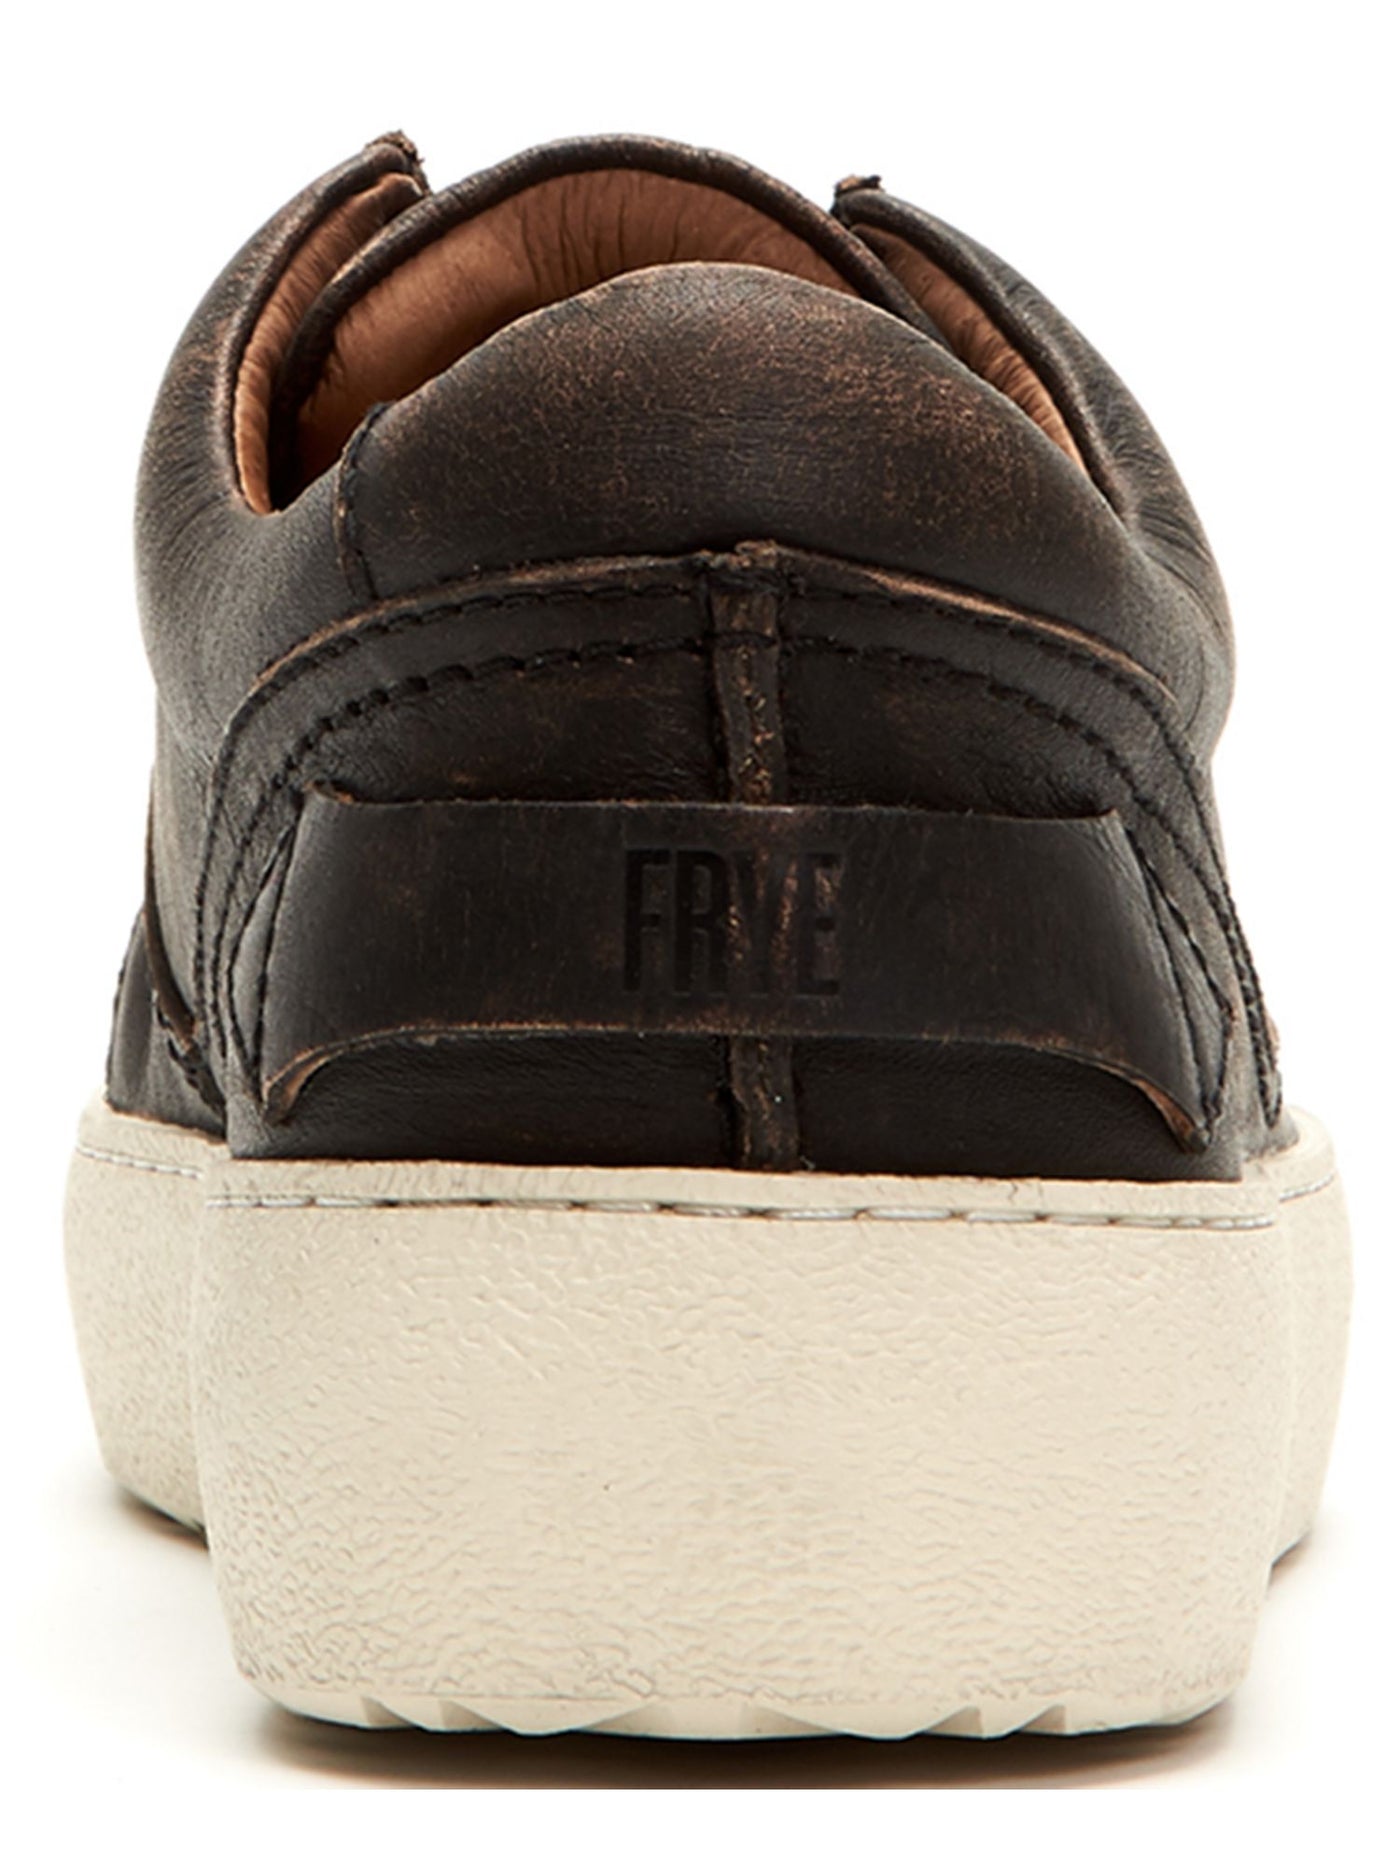 FRYE Womens Black Cushioned Padded Webster Round Toe Platform Lace-Up Leather Sneakers Shoes 6 M